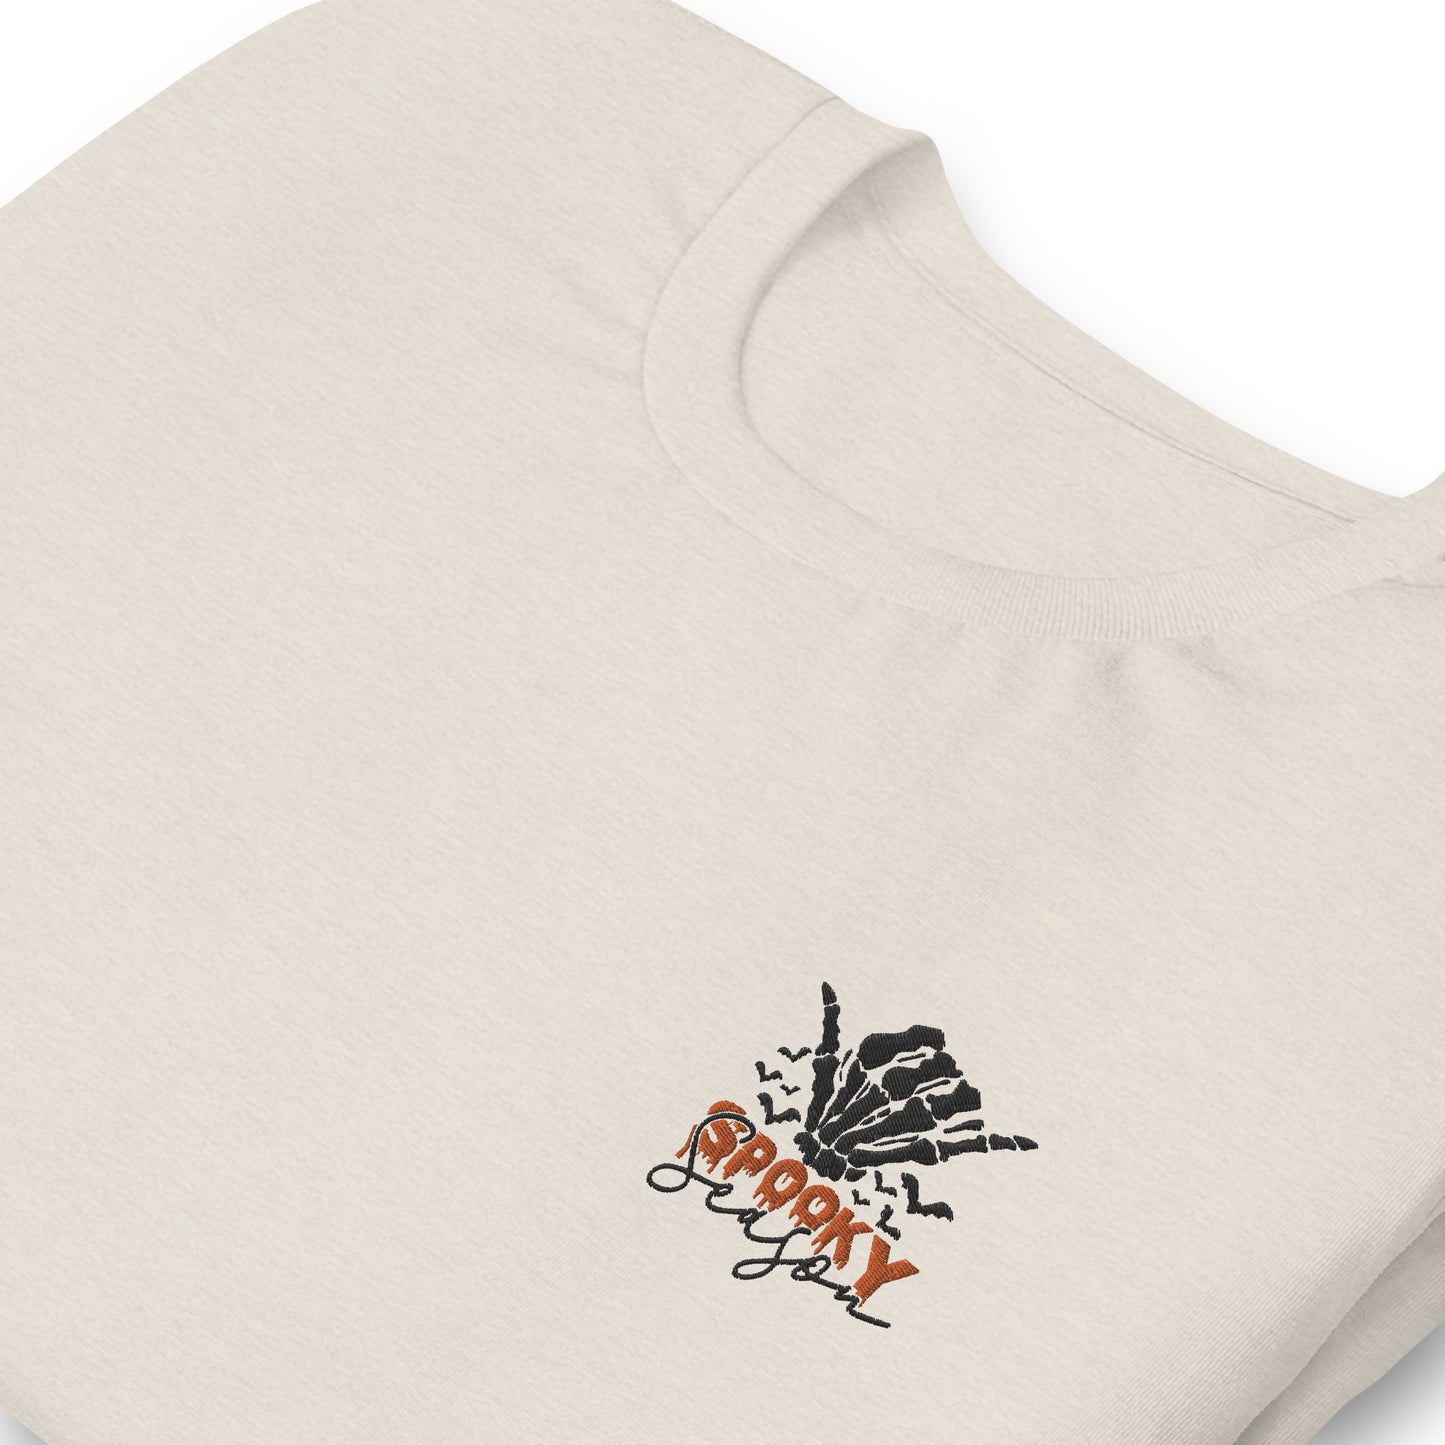 Embroidered Spooky Season T-shirt